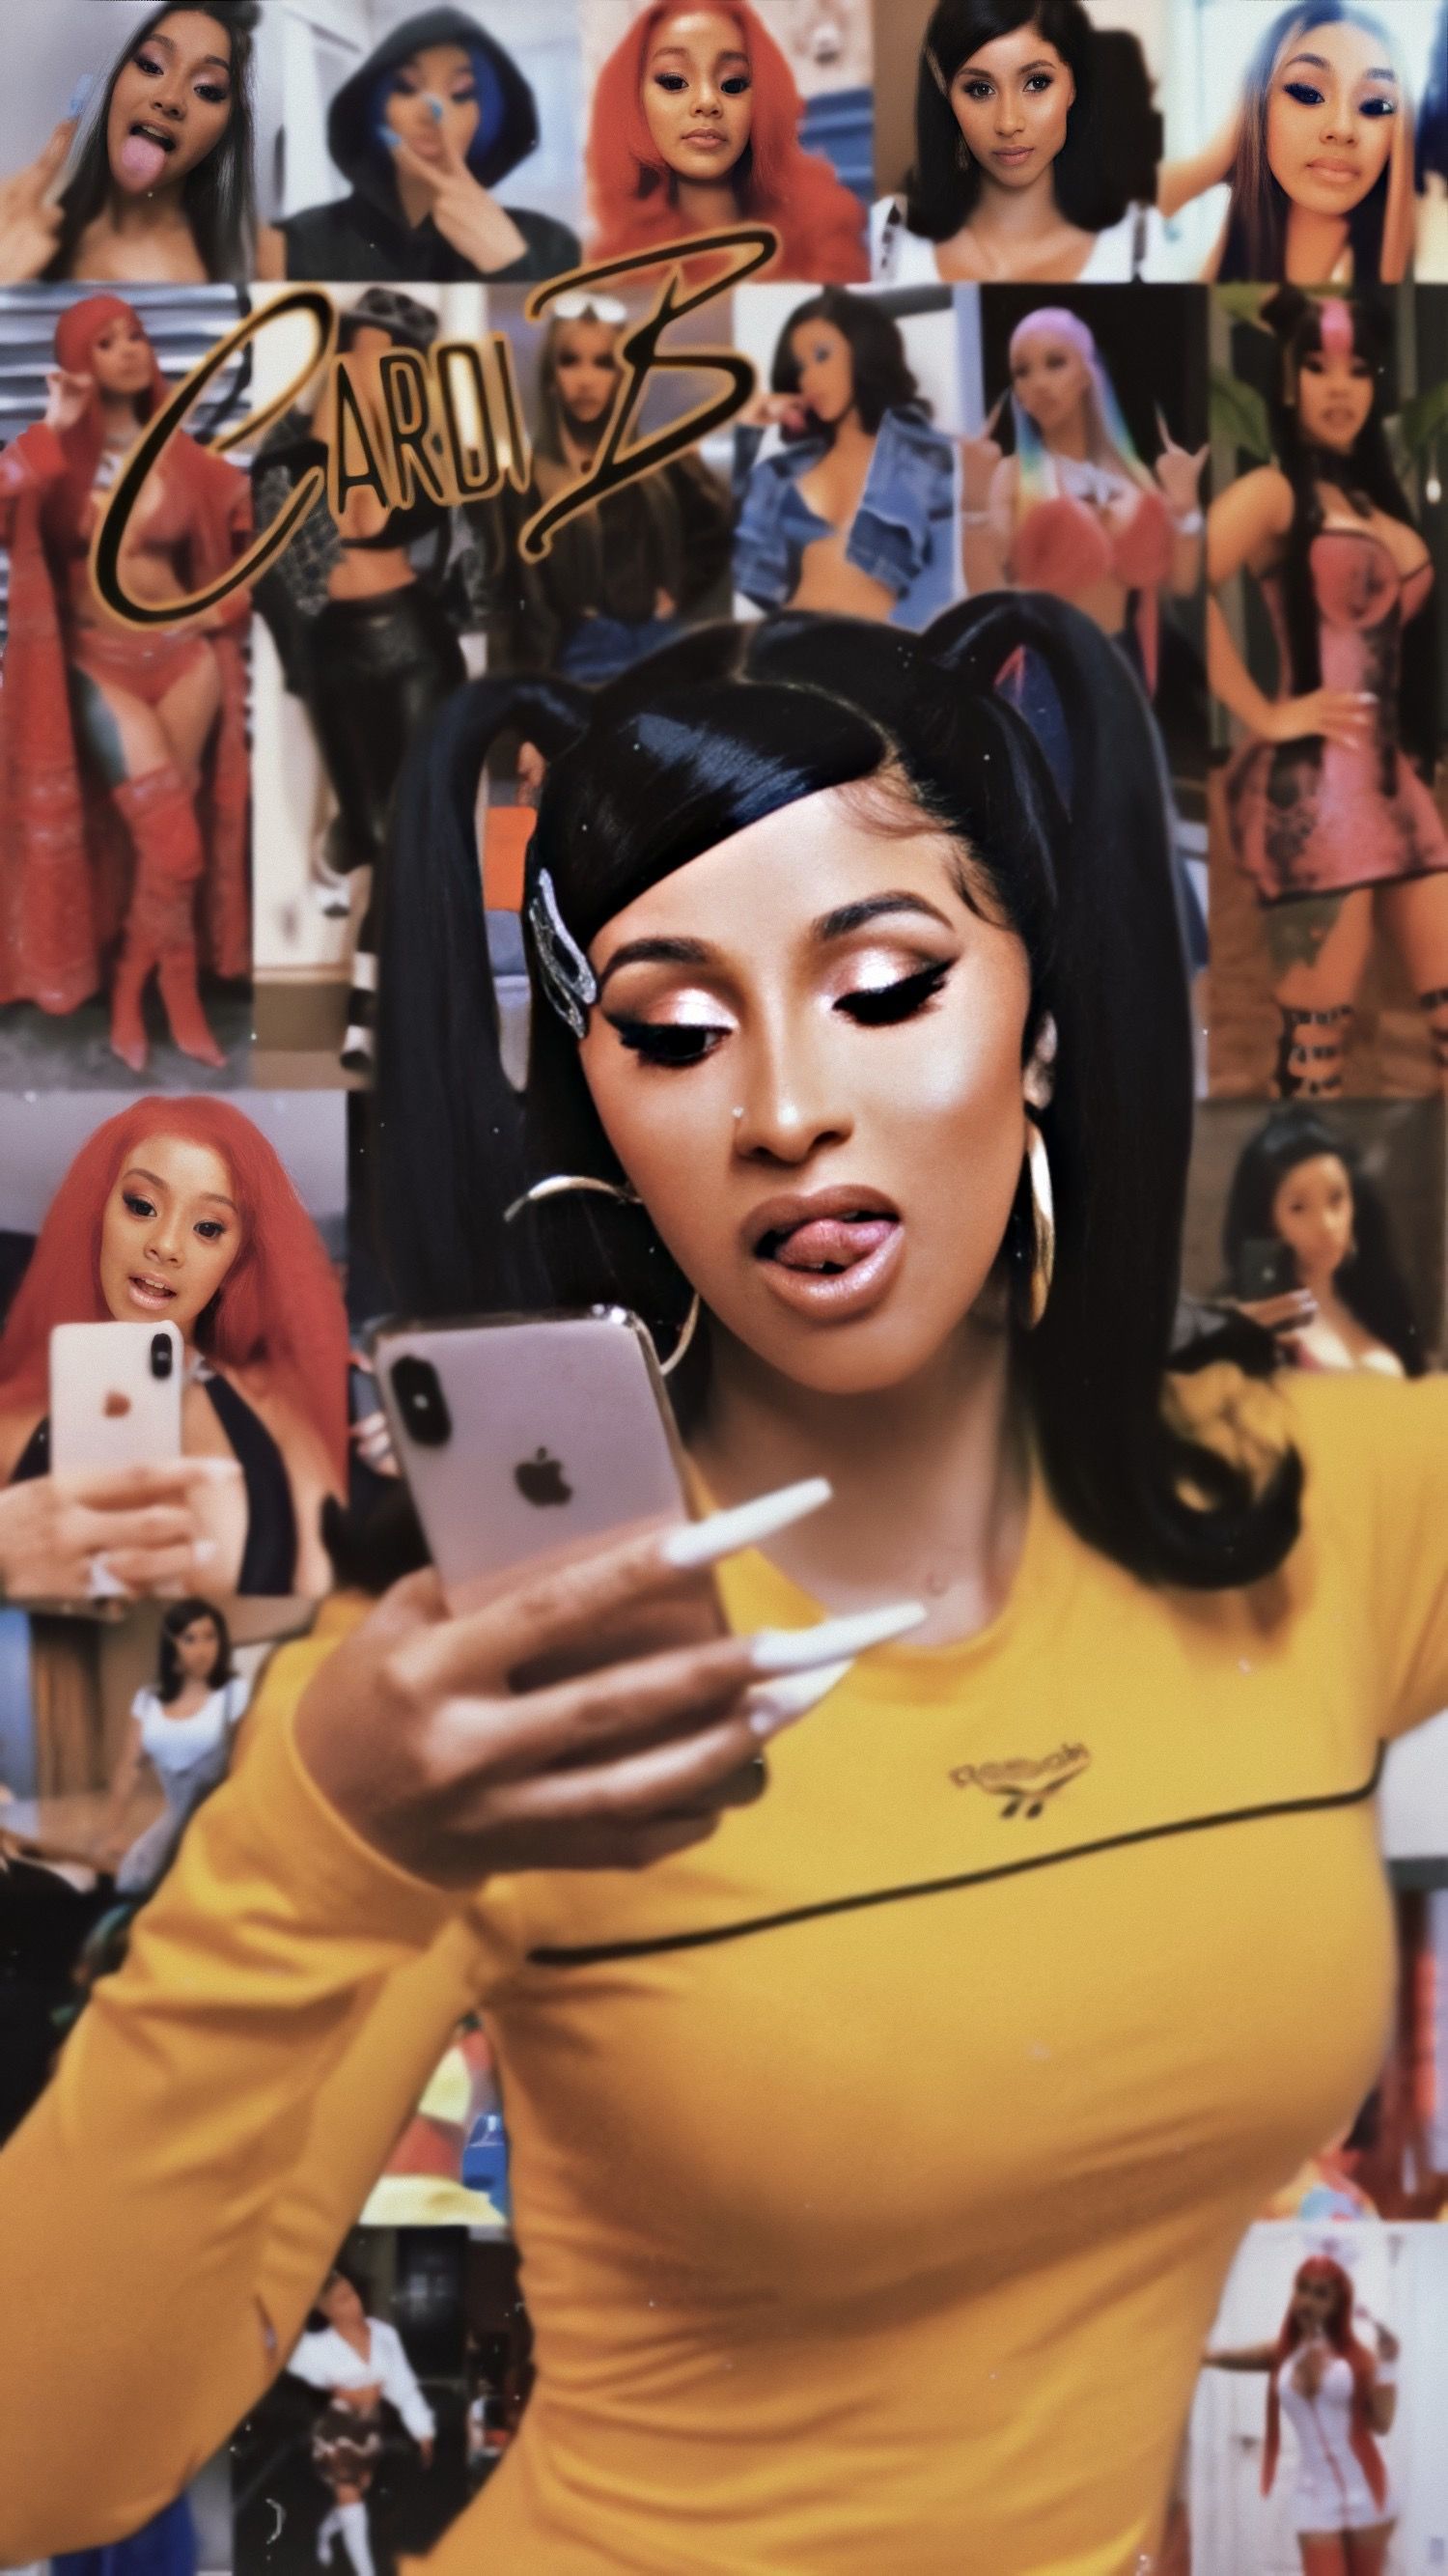 Download Cardi B wallpapers for mobile phone free Cardi B HD pictures